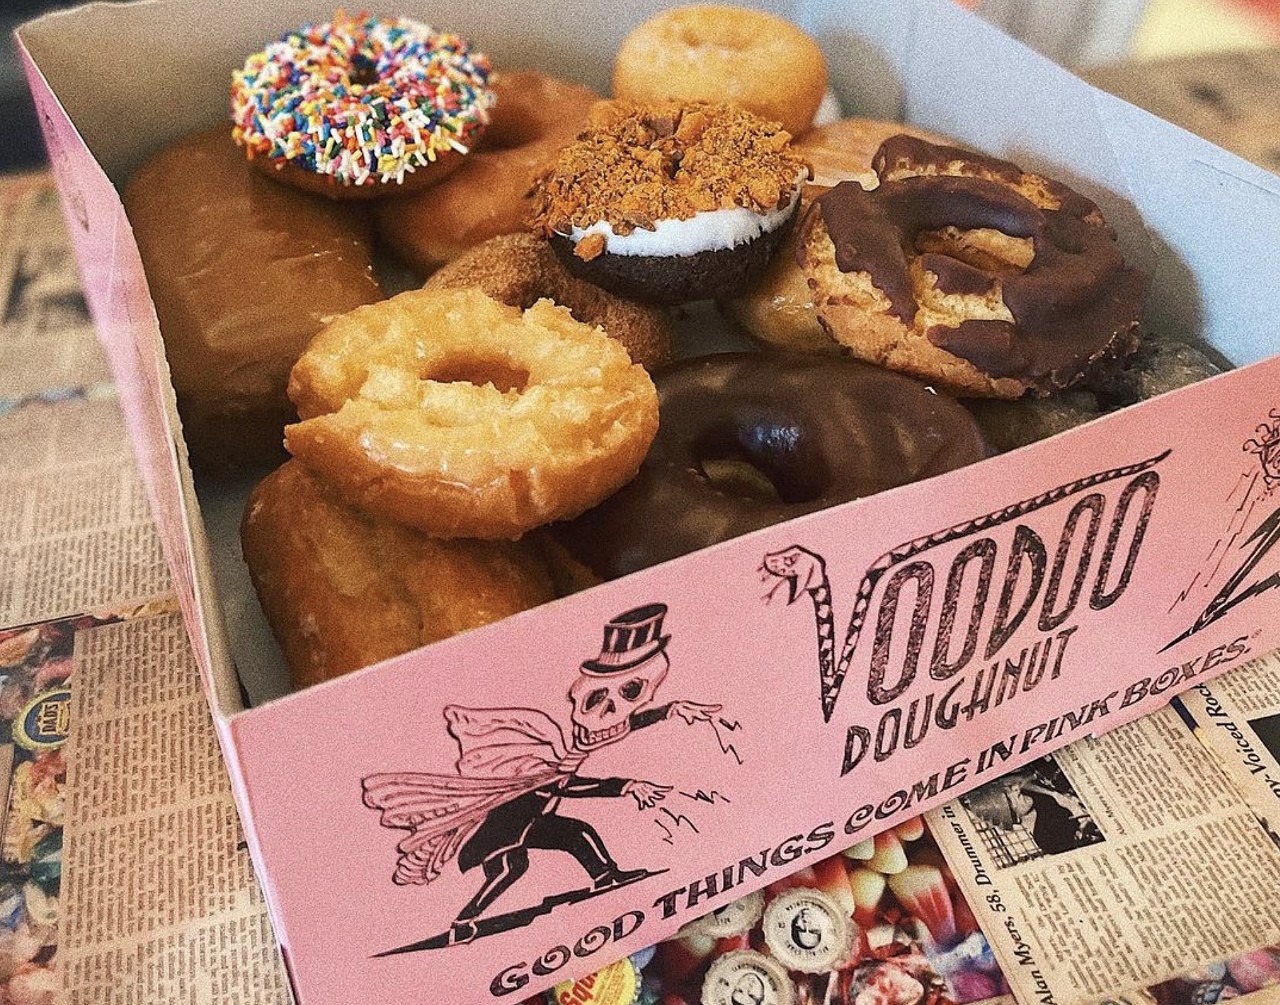 Voodoo Doughnut
400 E. Houston St., voodoodoughnut.com
Iconic Portland-based Voodoo Doughnut will make its San Antonio debut by year’s end, becoming downtown’s first 24-hour coffee-and-donut spot. It will occupy the space previously filled by Playland Pizza. 
Photo via Instagram / voodoodoughnut